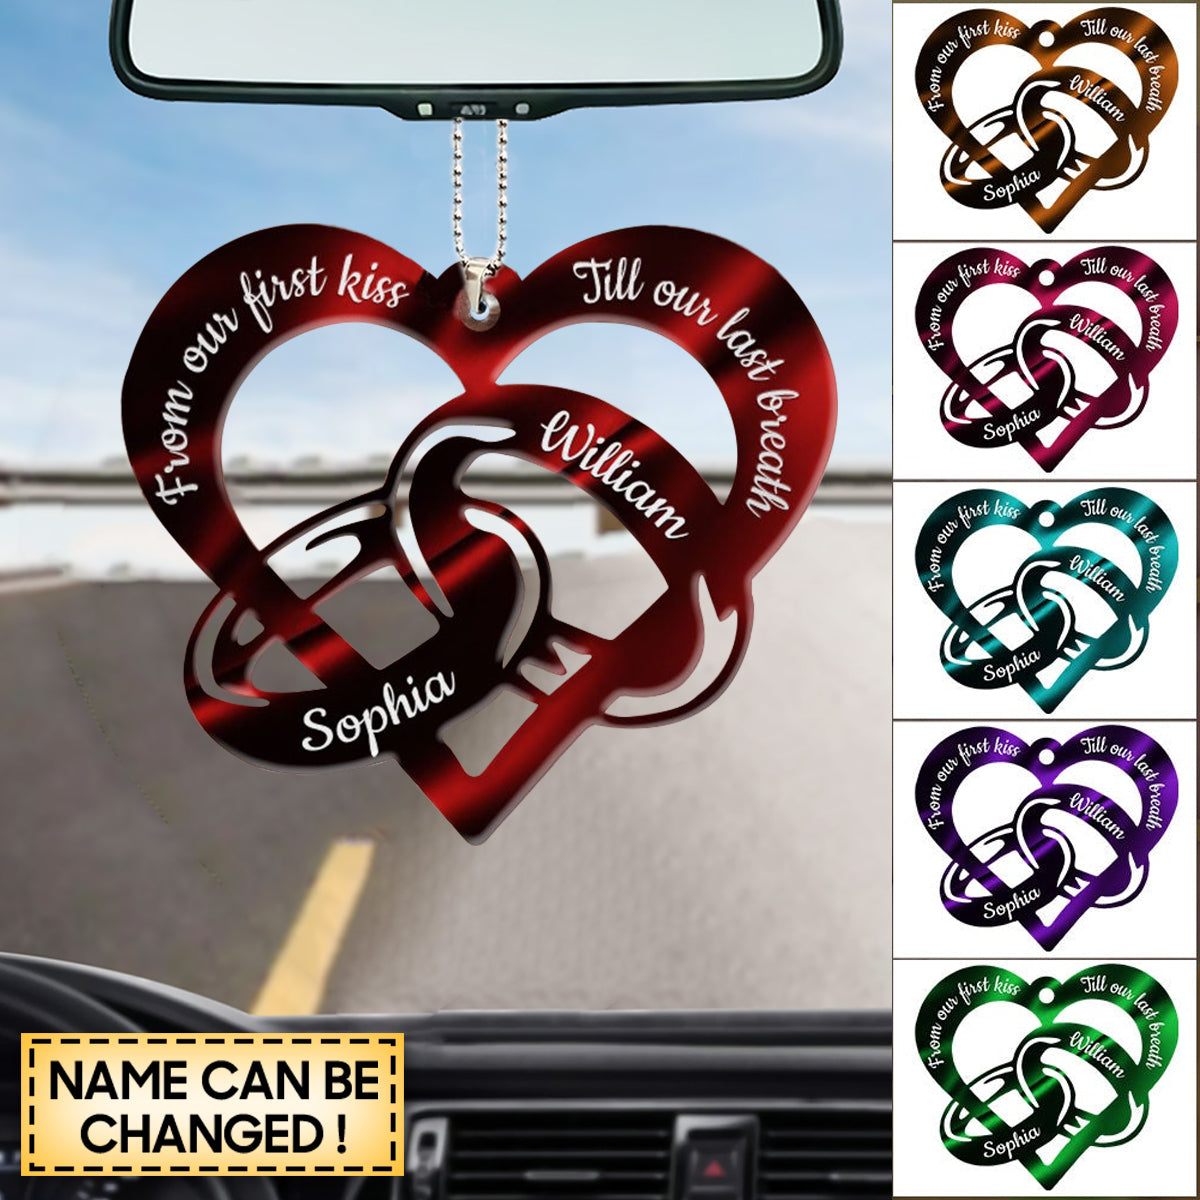 From Our First Kiss Till Our Last Breath Couple Rings Personalized Car Hang Ornament